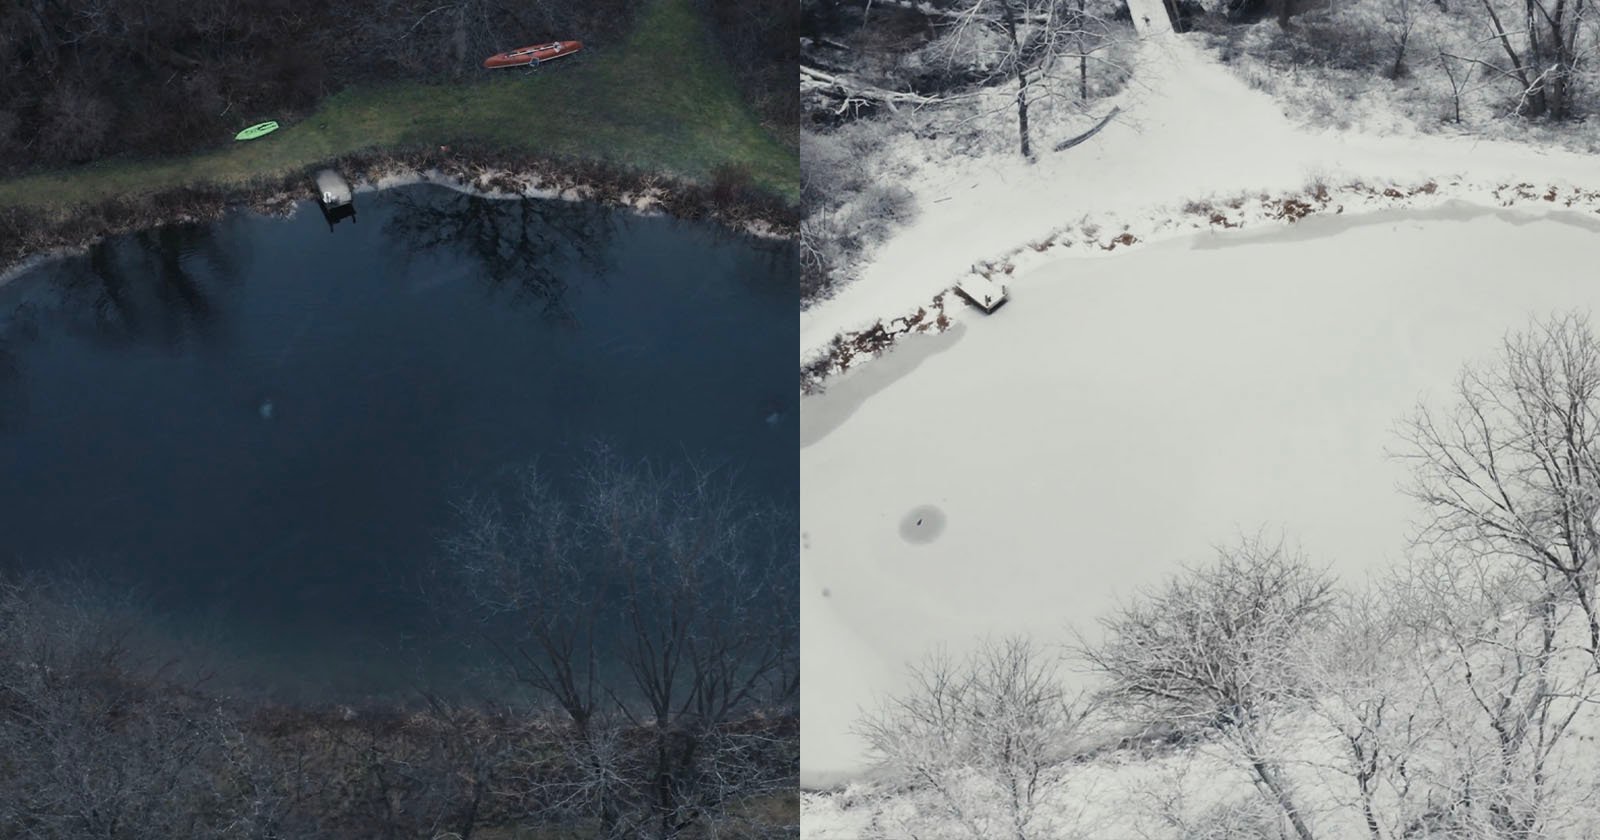  photographer spends five years shooting winter timelapse movie 